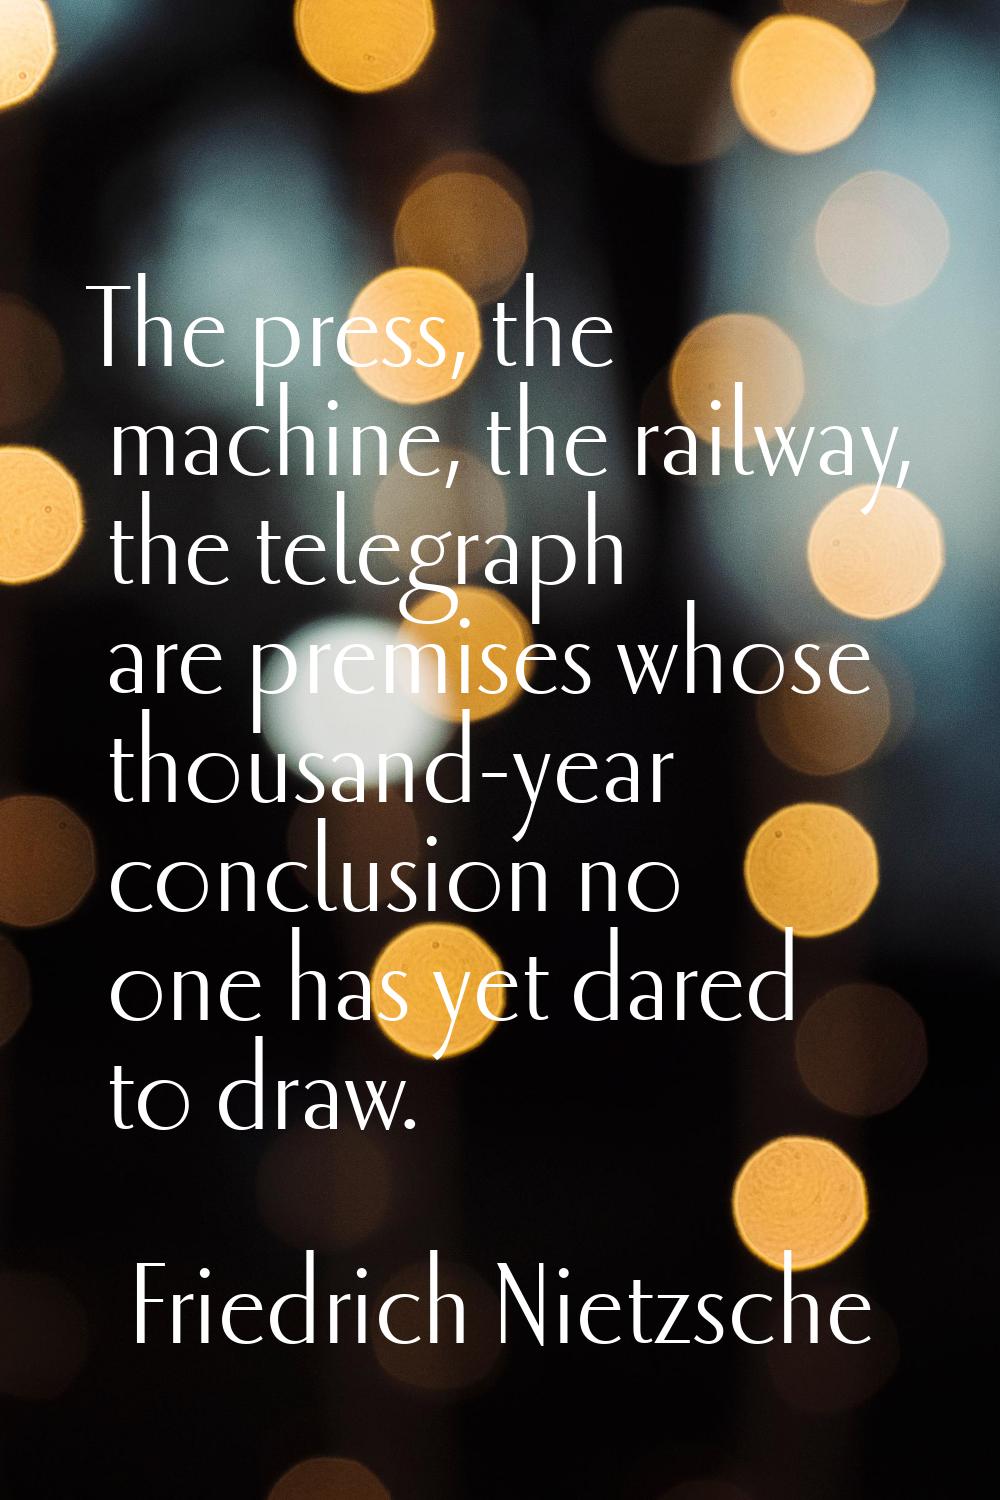 The press, the machine, the railway, the telegraph are premises whose thousand-year conclusion no o